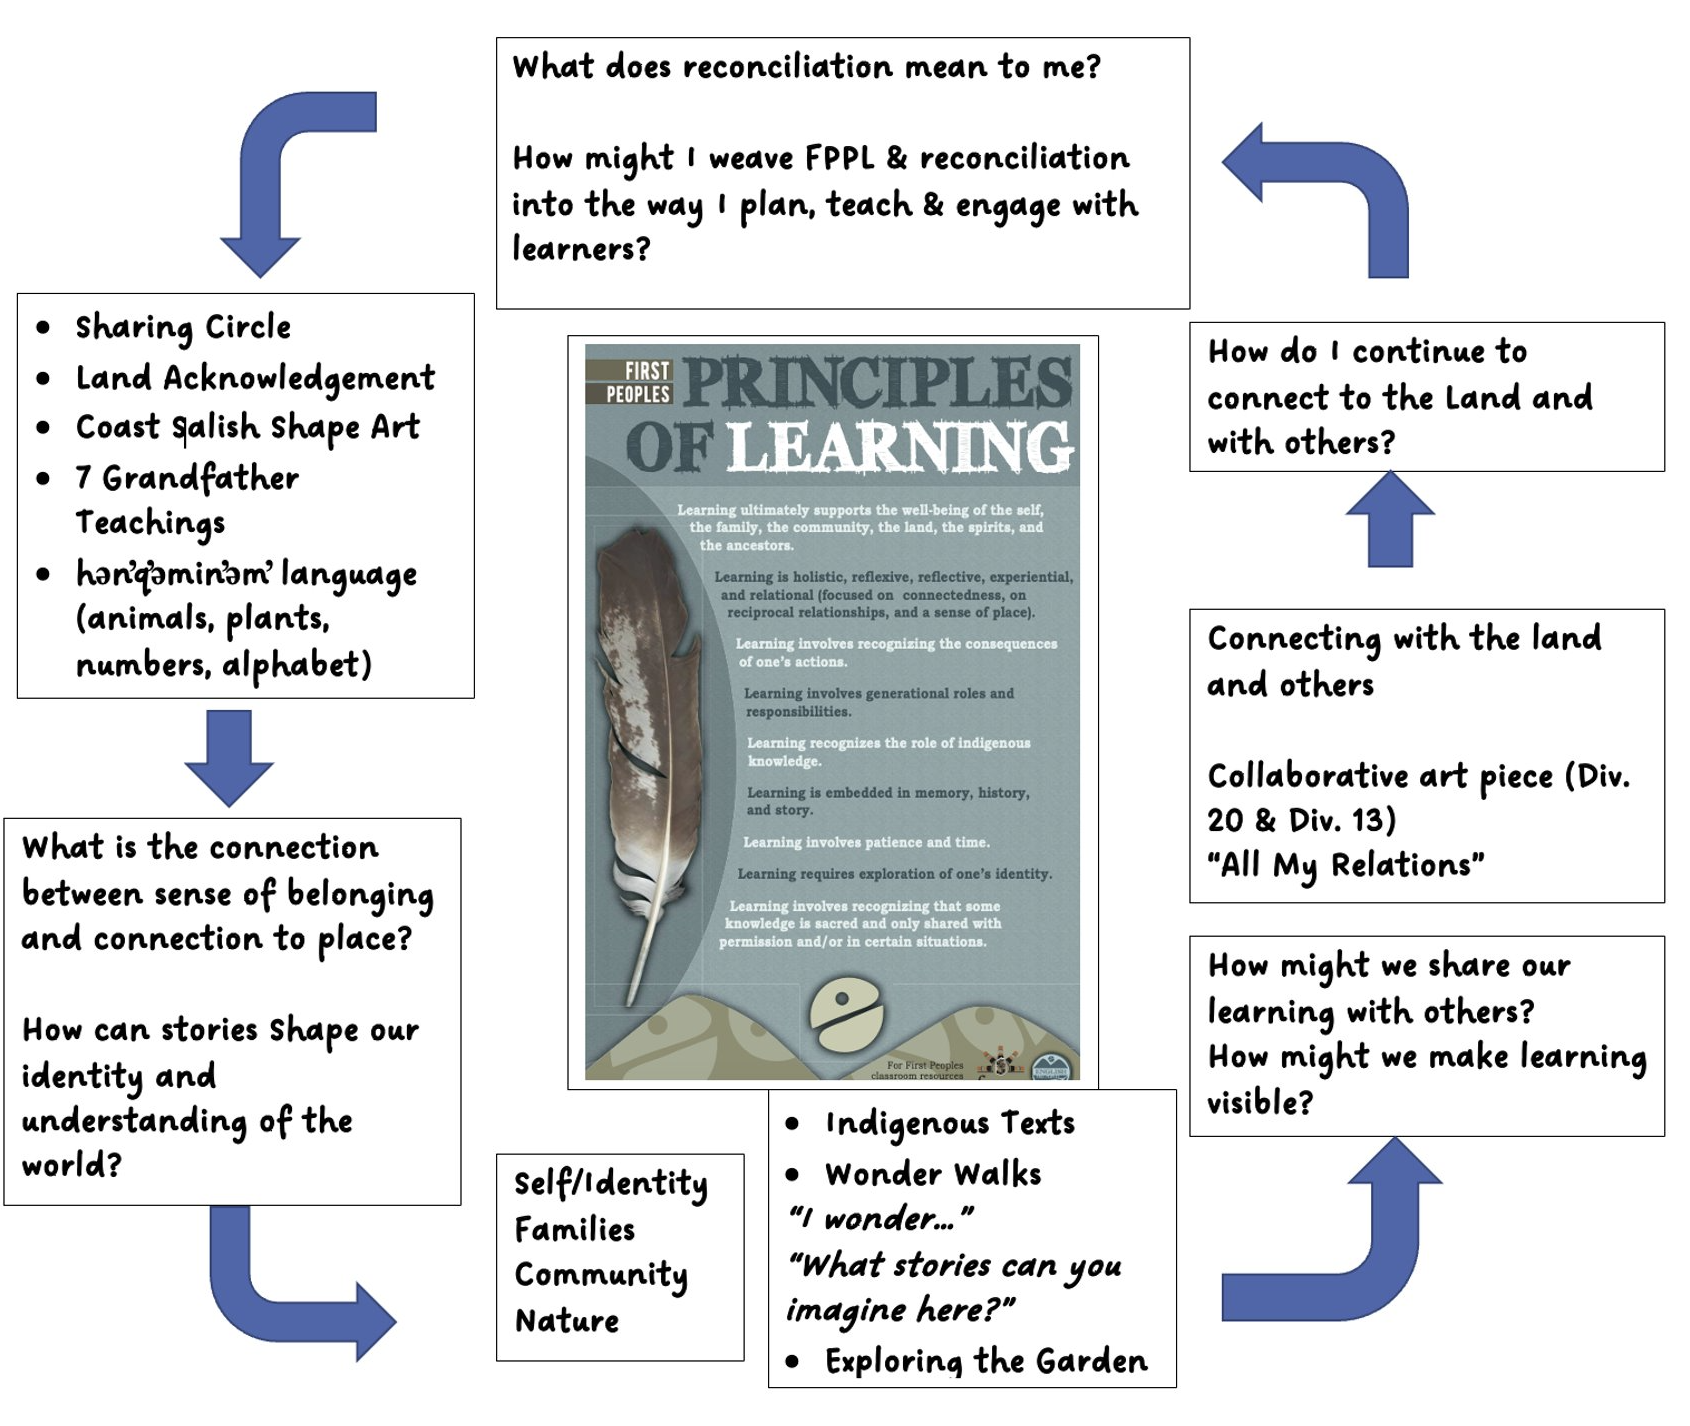 Principles of Learning